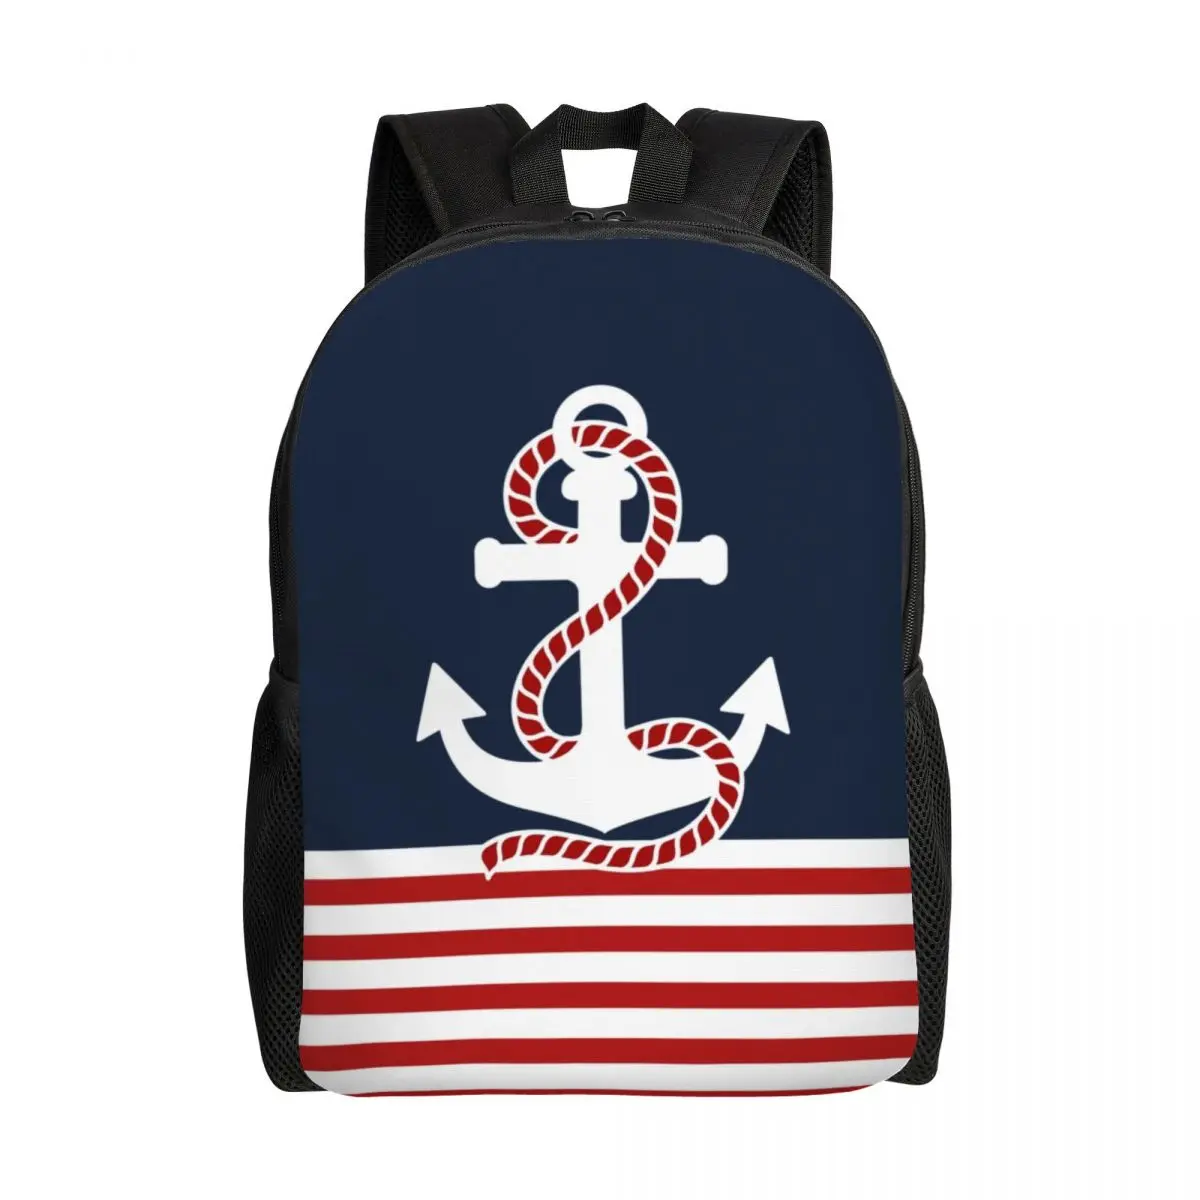 Nautical Stripes And Red Anchor Backpack for Boys Girls Sailing Sailor College School Travel Bags Bookbag Fits 15 Inch Laptop